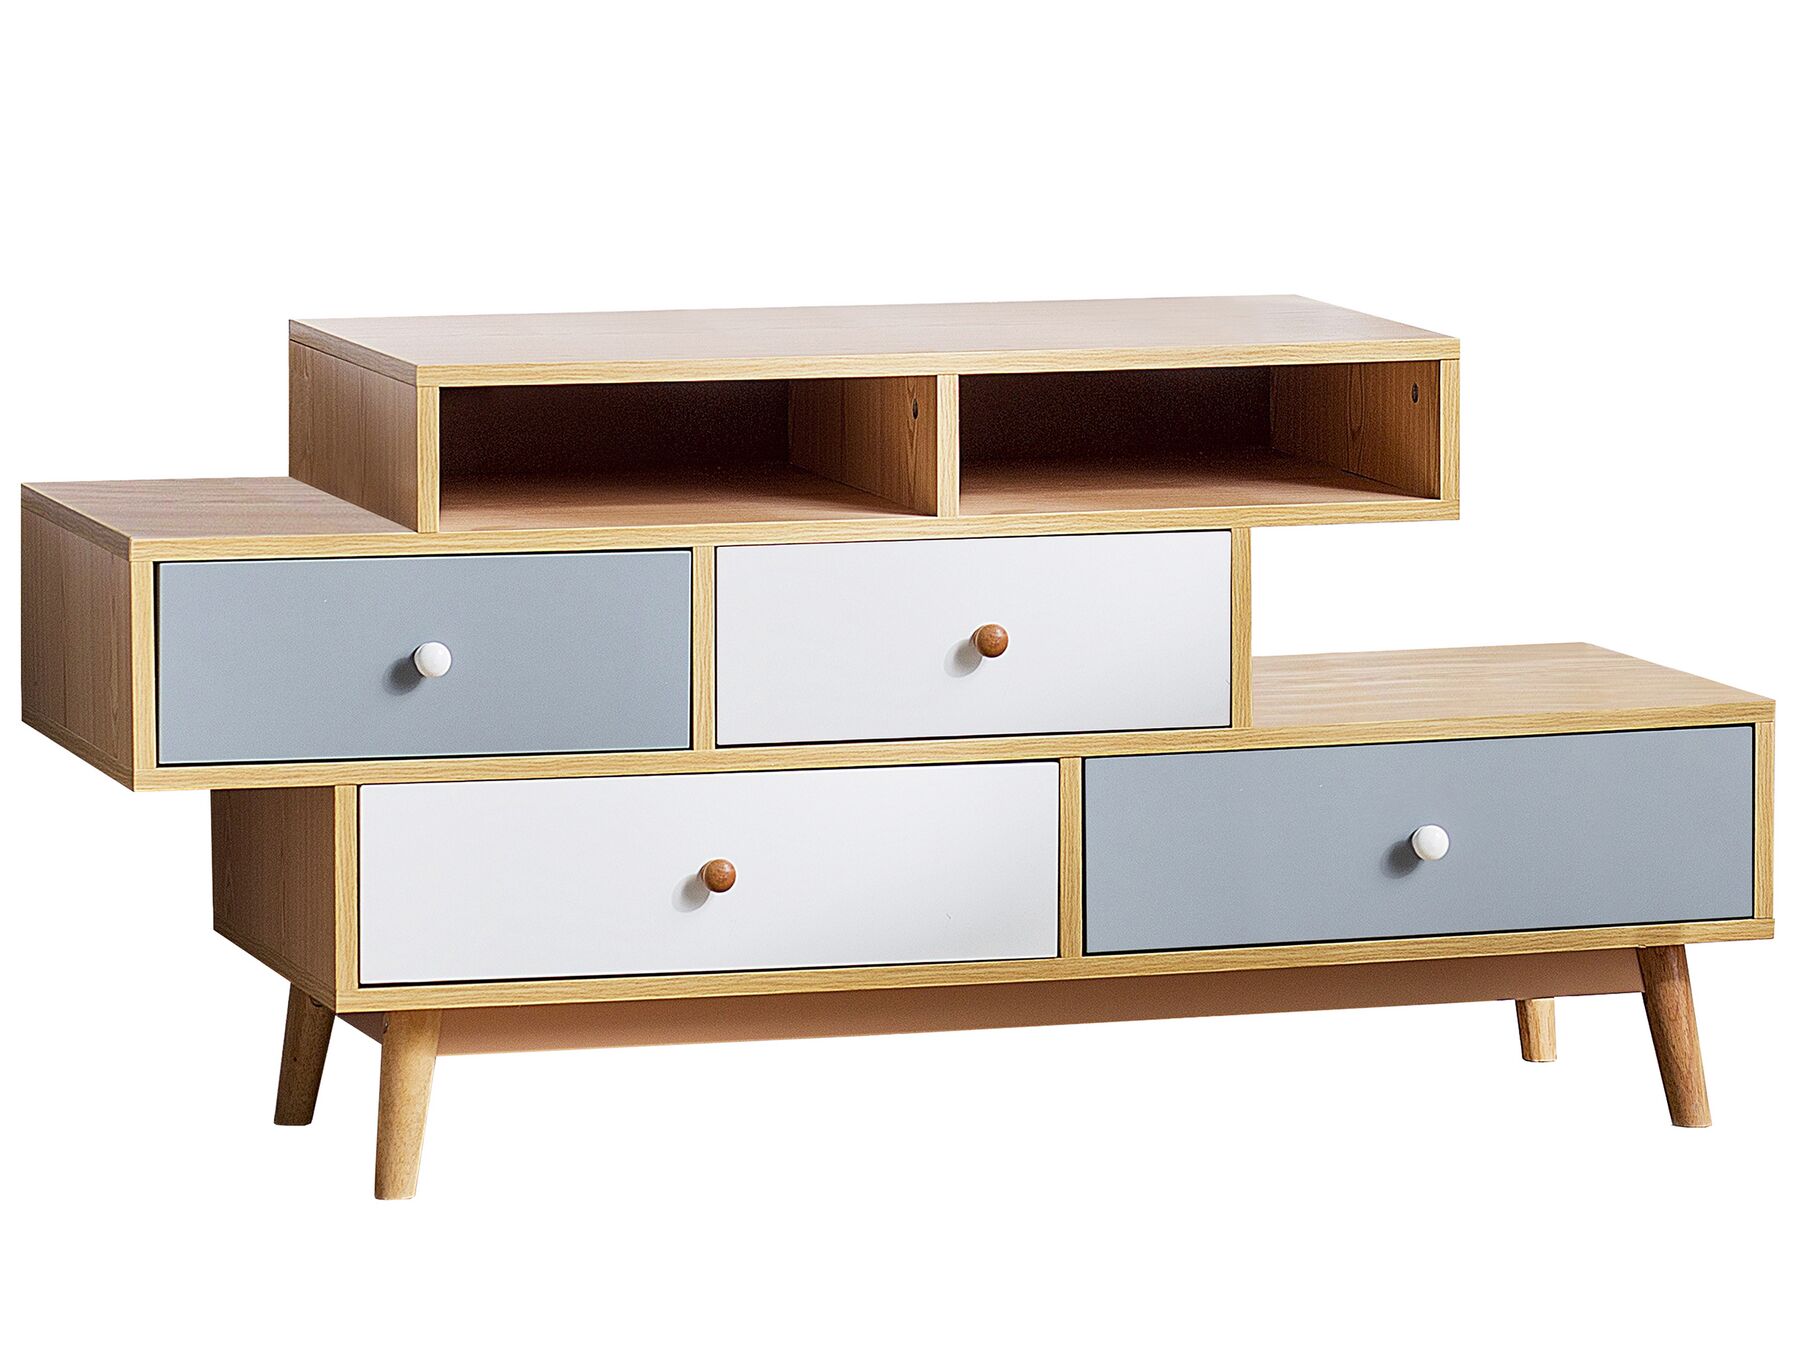 Dresser Wooden Look Tan with Grips 4 Drawers White/Grey 2 Trays Irvine-